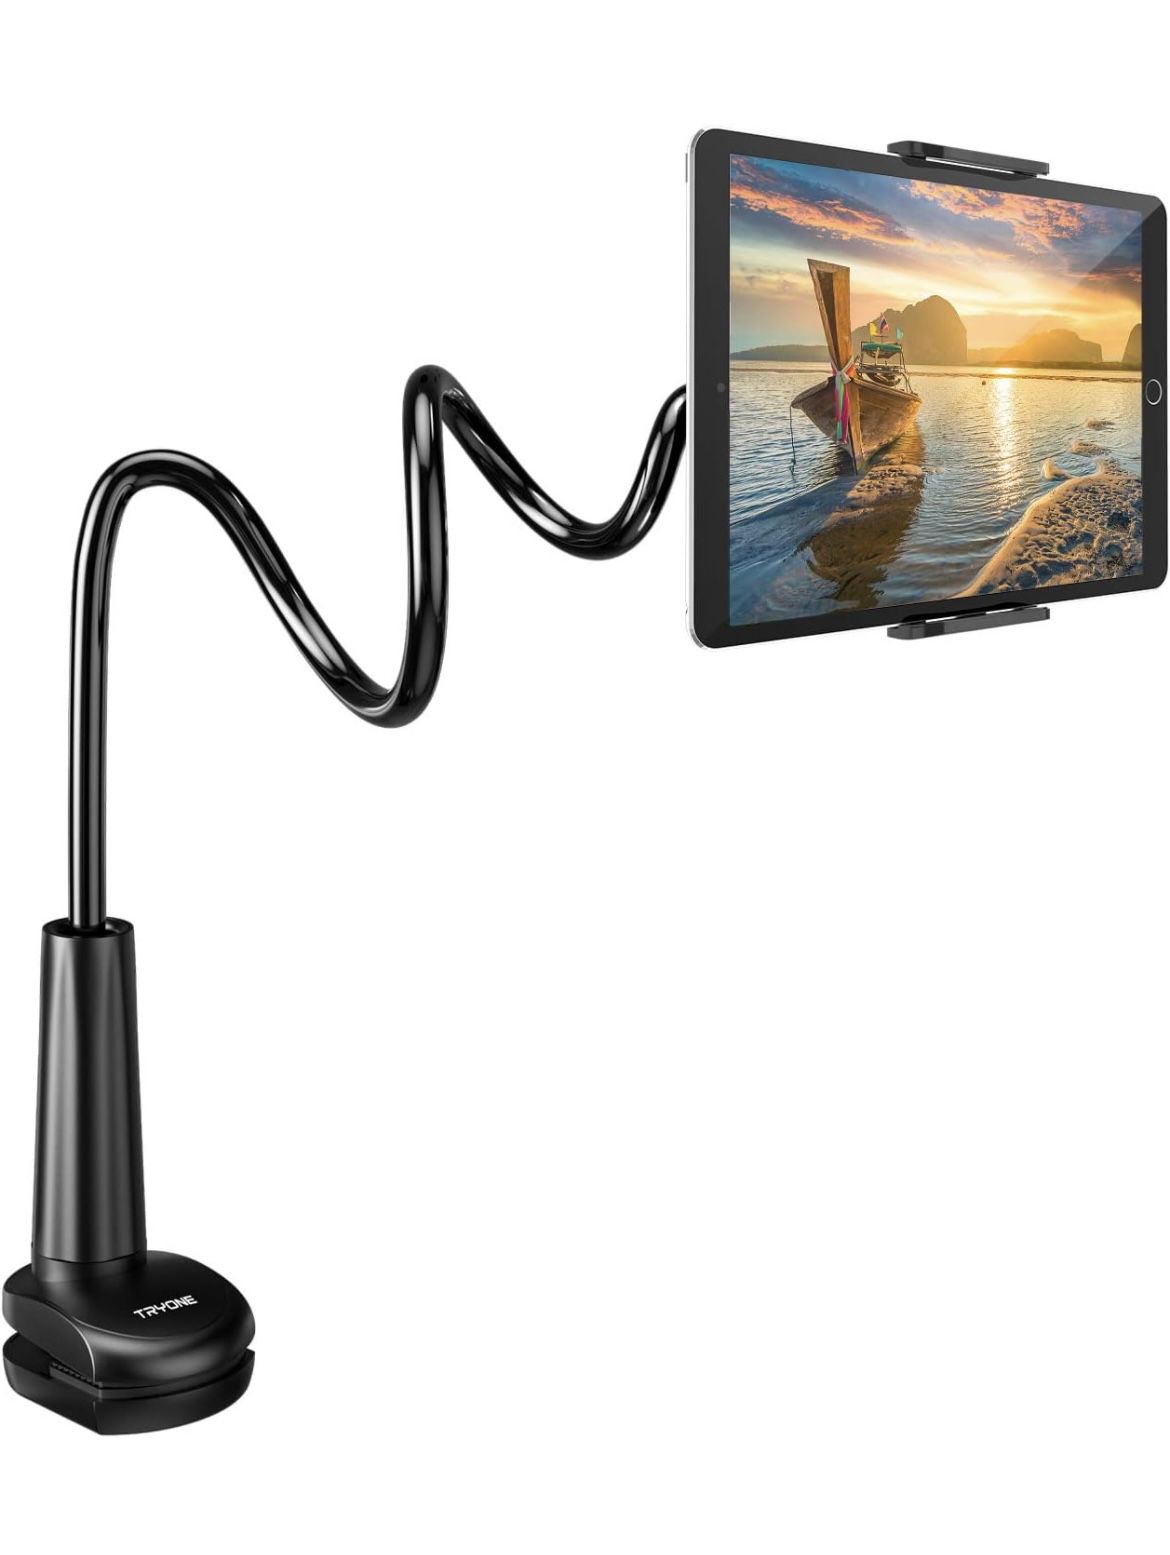 Tryone Gooseneck Tablet Holder Stand for Bed Adjustable Flexible Arm Tablets Mount Clamp on Table Compatible with iPad Air Mini | Galaxy Tabs | Kindle